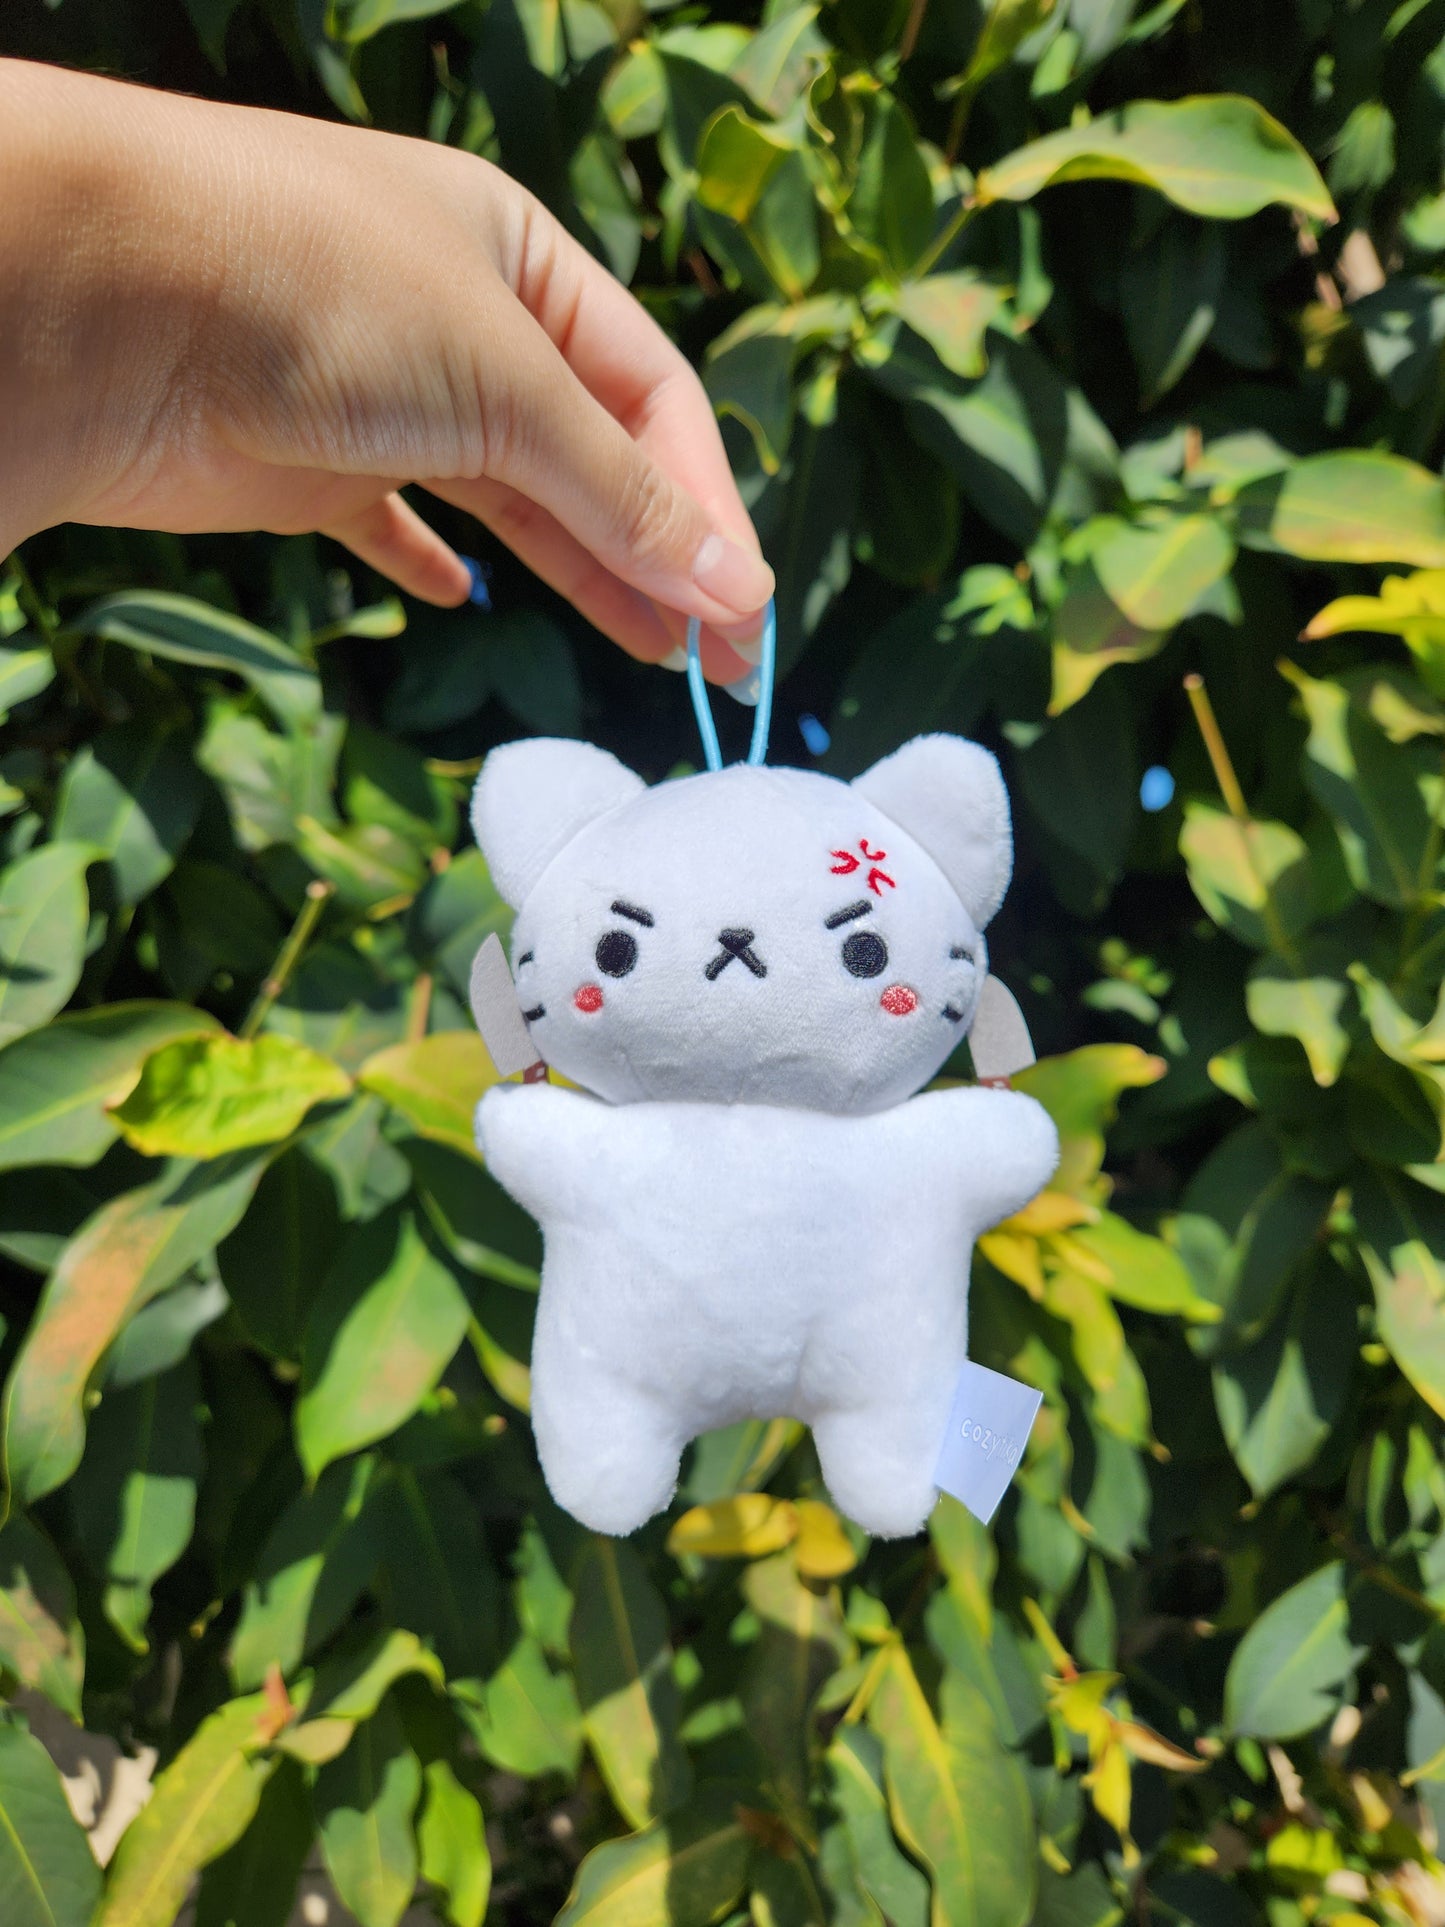 hand holding the elastic band of an angry white cat plushy with two knives